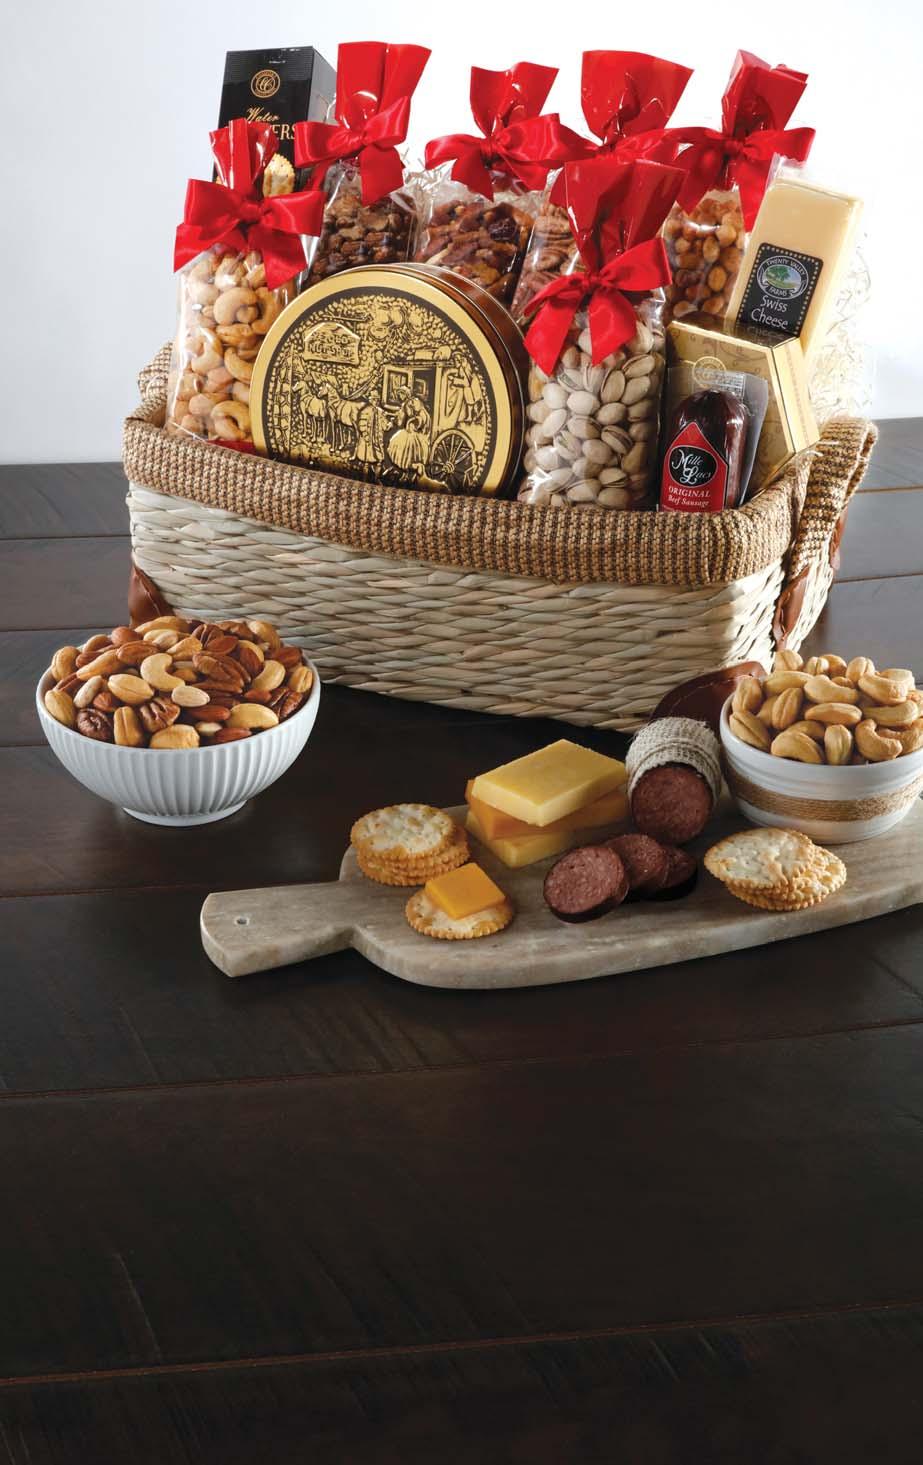 New! Treasure Trove This abundant new collection is bursting with flavor, starting with six decorative bags of Peterson s most treasured treats: golden-roasted Colossal Cashews, natural Pistachios,